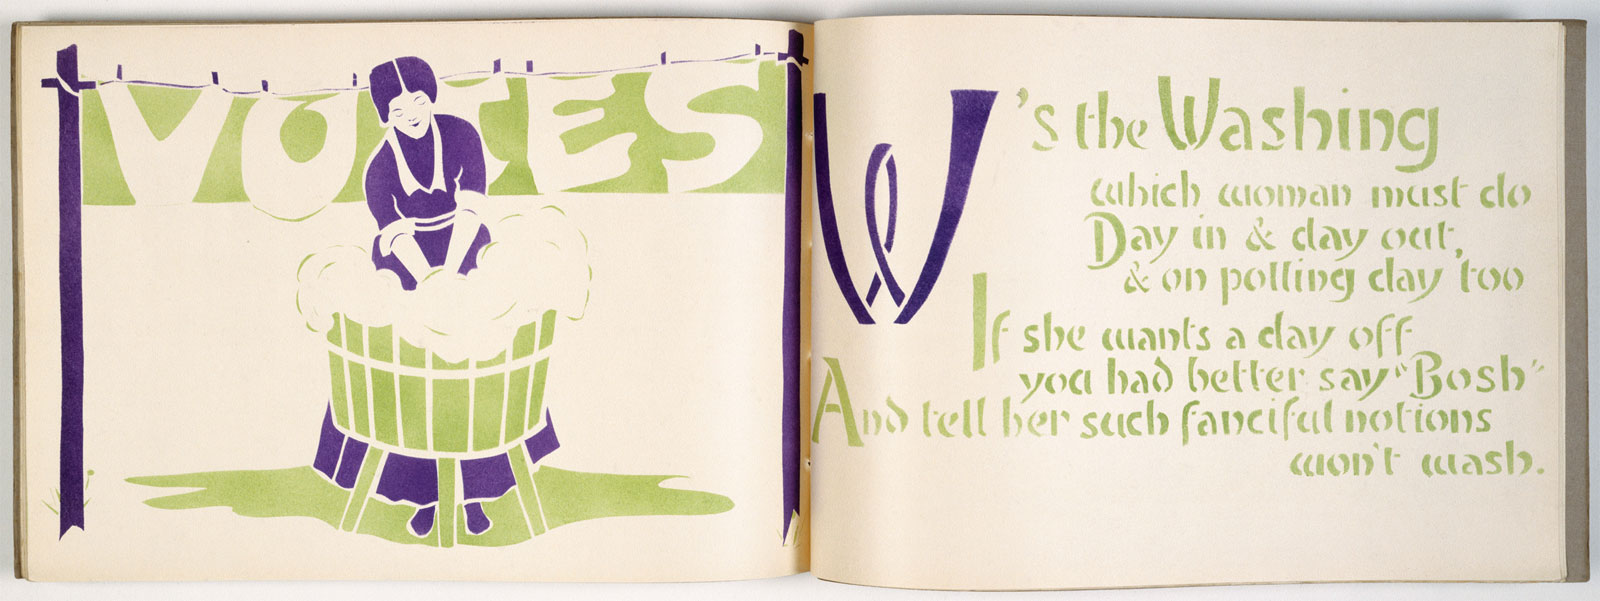 'An Anti-Suffrage Alphabet' was designed by Laurence Housman and edited by Leonora Tyson, the organiser of the Lambeth/Southwark Women's Social and Political Union. The verses, documenting disenfranchised women's unfair subordination, lampooned opponents of women's suffrage. The book includes stencilled illustrations in the suffragette colours of purple and green by a number of female artists including Alice B. Woodward, Pamela C. Smith and Ada P. Ridley. The book was produced to raise funds for the suffragette campaign. Advertised in 'Votes for Women' on 15 December 1911, it was marketed as a suitable gift for suffragette supporters. Leonora received book orders at her home address in Streatham, where she printed each edition by hand.
